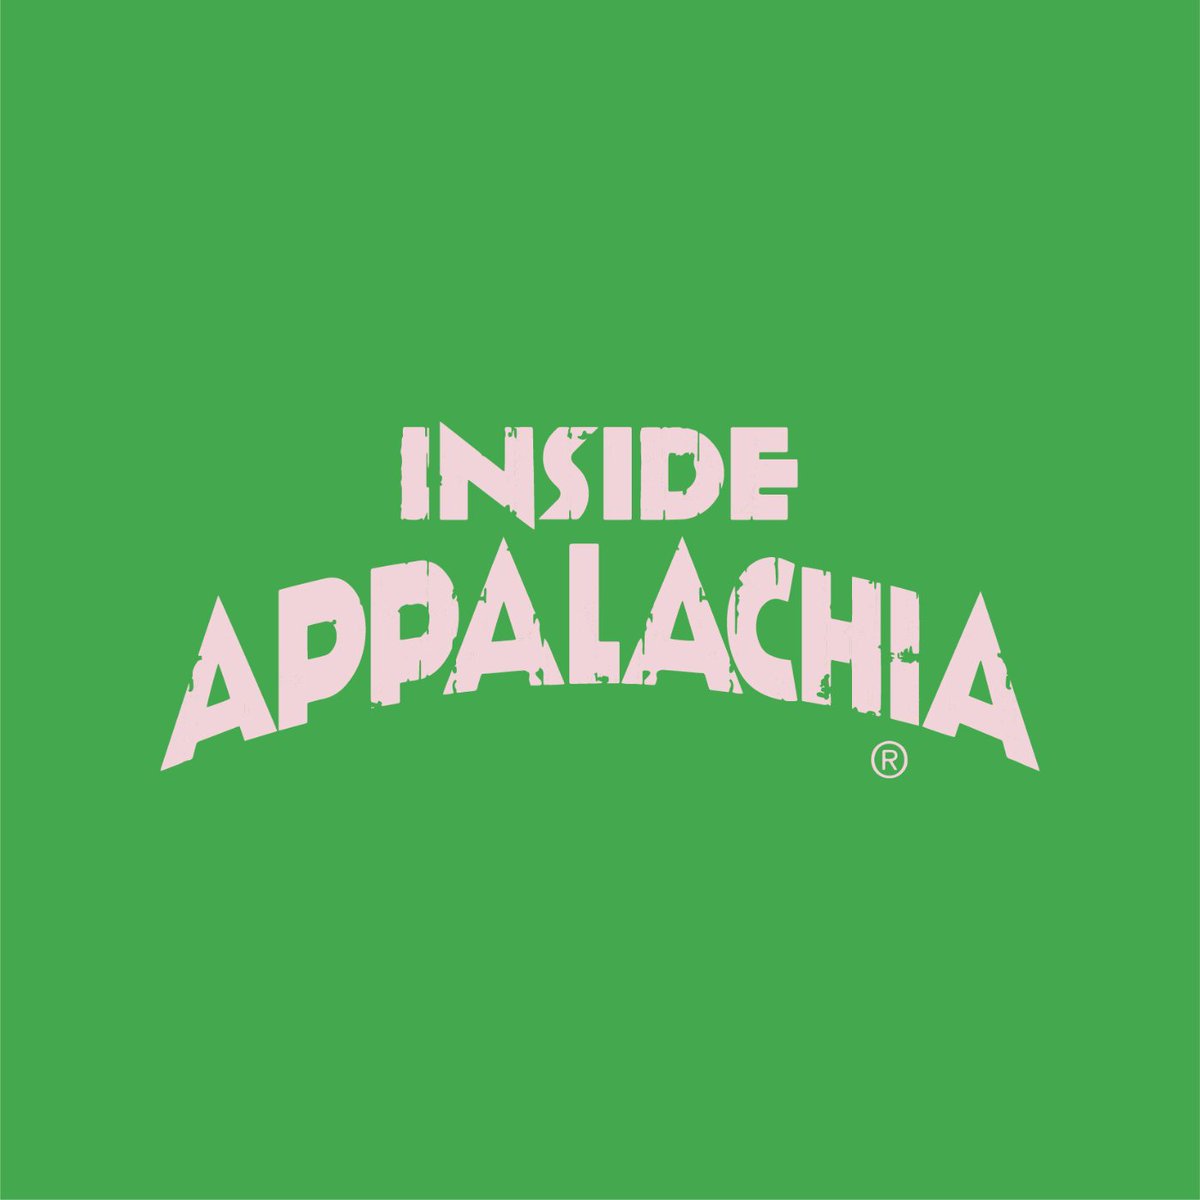 This week on #InsideAppalachia 🌄, flooding is a recurring problem across Appalachia. So we’re taking stock, and looking back on floods that have devastated parts of West Virginia and Kentucky. 👉 Listen SUNDAY at 7AM & 6PM on WVPB Radio. wvpublic.org/player/